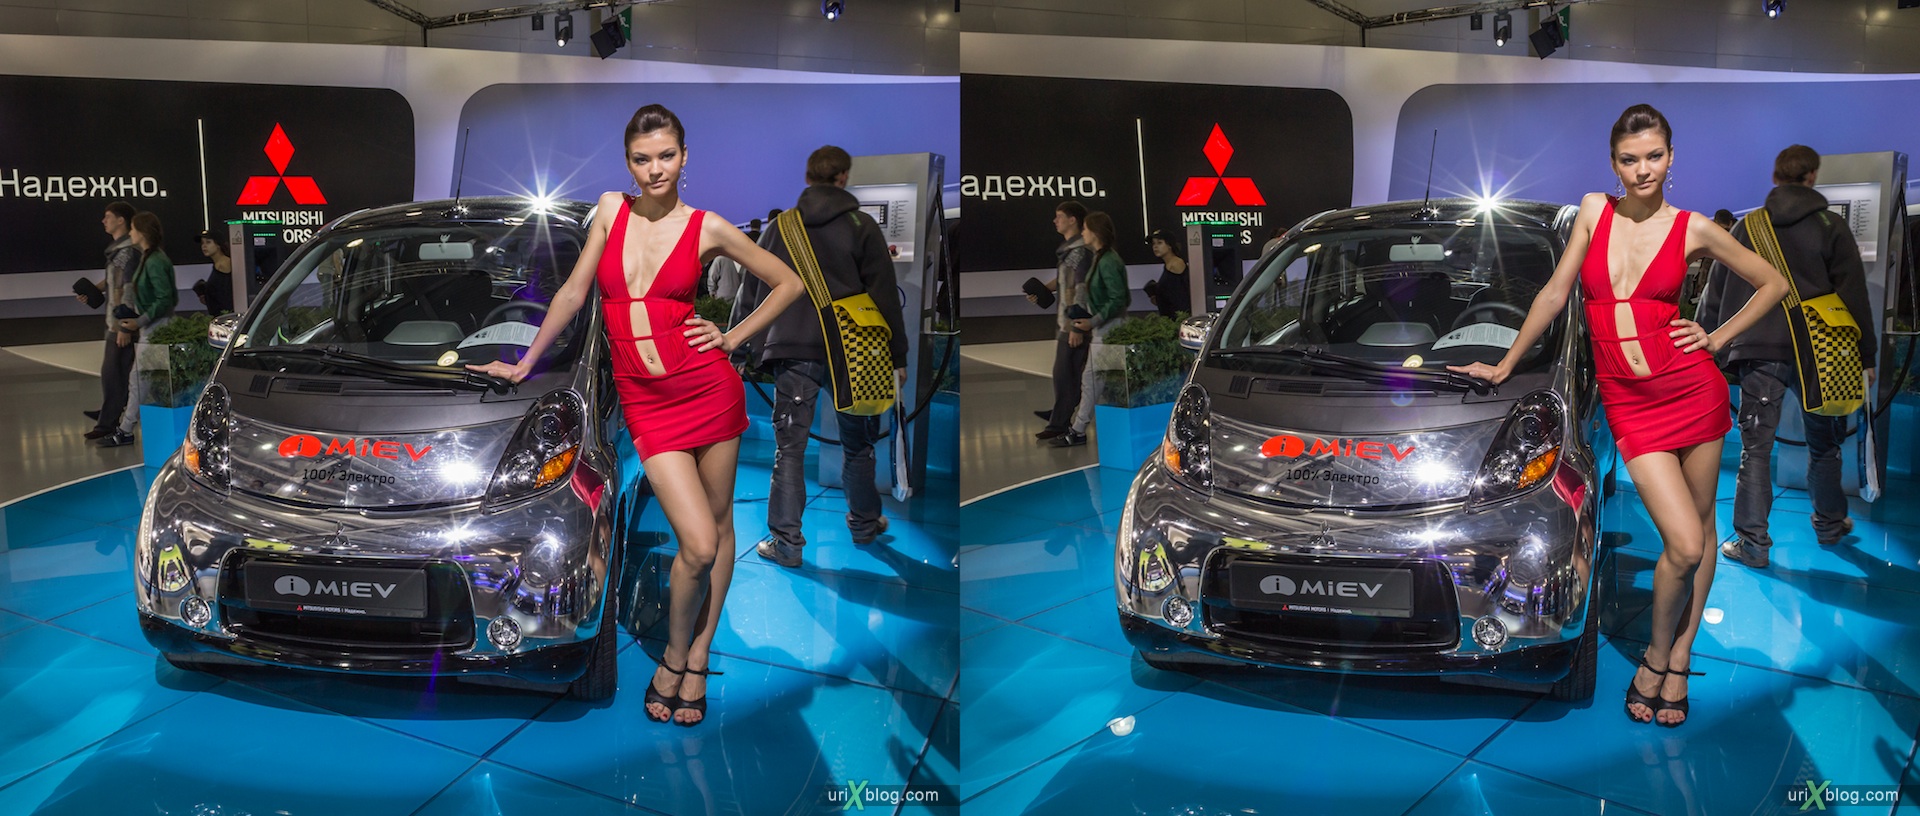 2012, i-Miev electro, girl, model, Moscow International Automobile Salon, auto show, 3D, stereo pair, cross-eyed, crossview